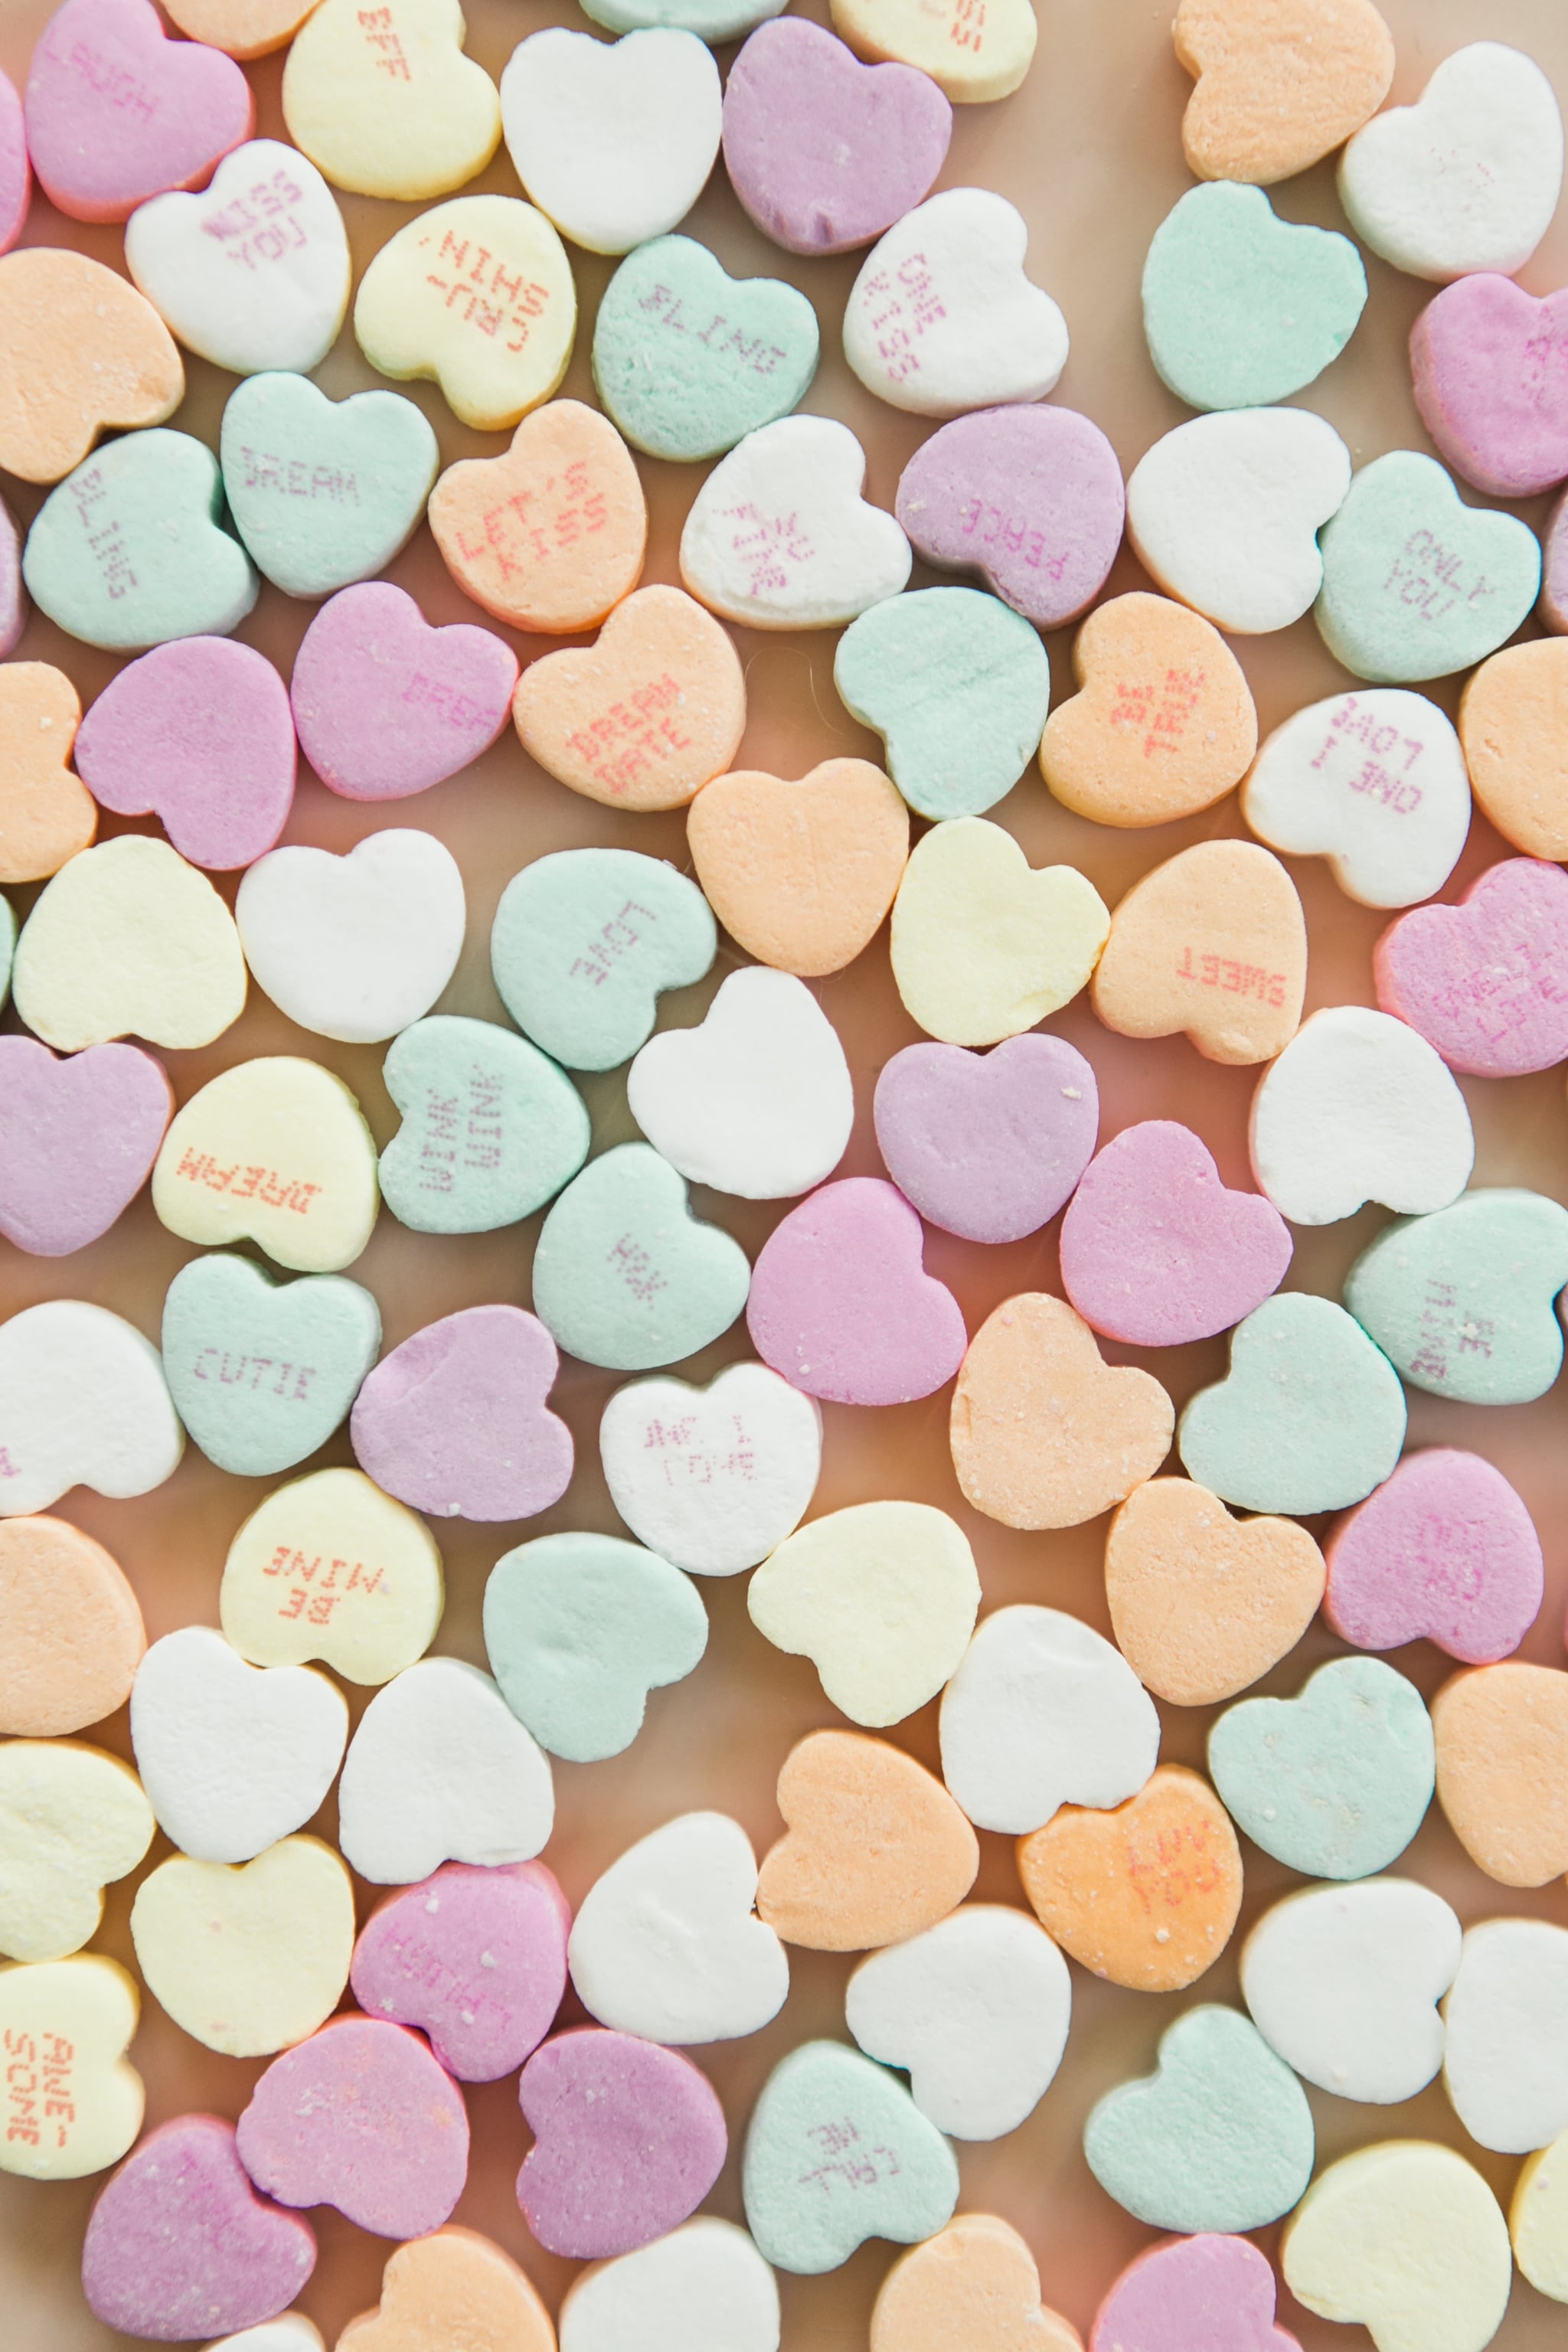 Heart Candy Iphone Wallpaper The Most Romantic Sweet And Downright Dreamy Iphone Wallpapers For Valentine S Day Popsugar Tech Photo 22